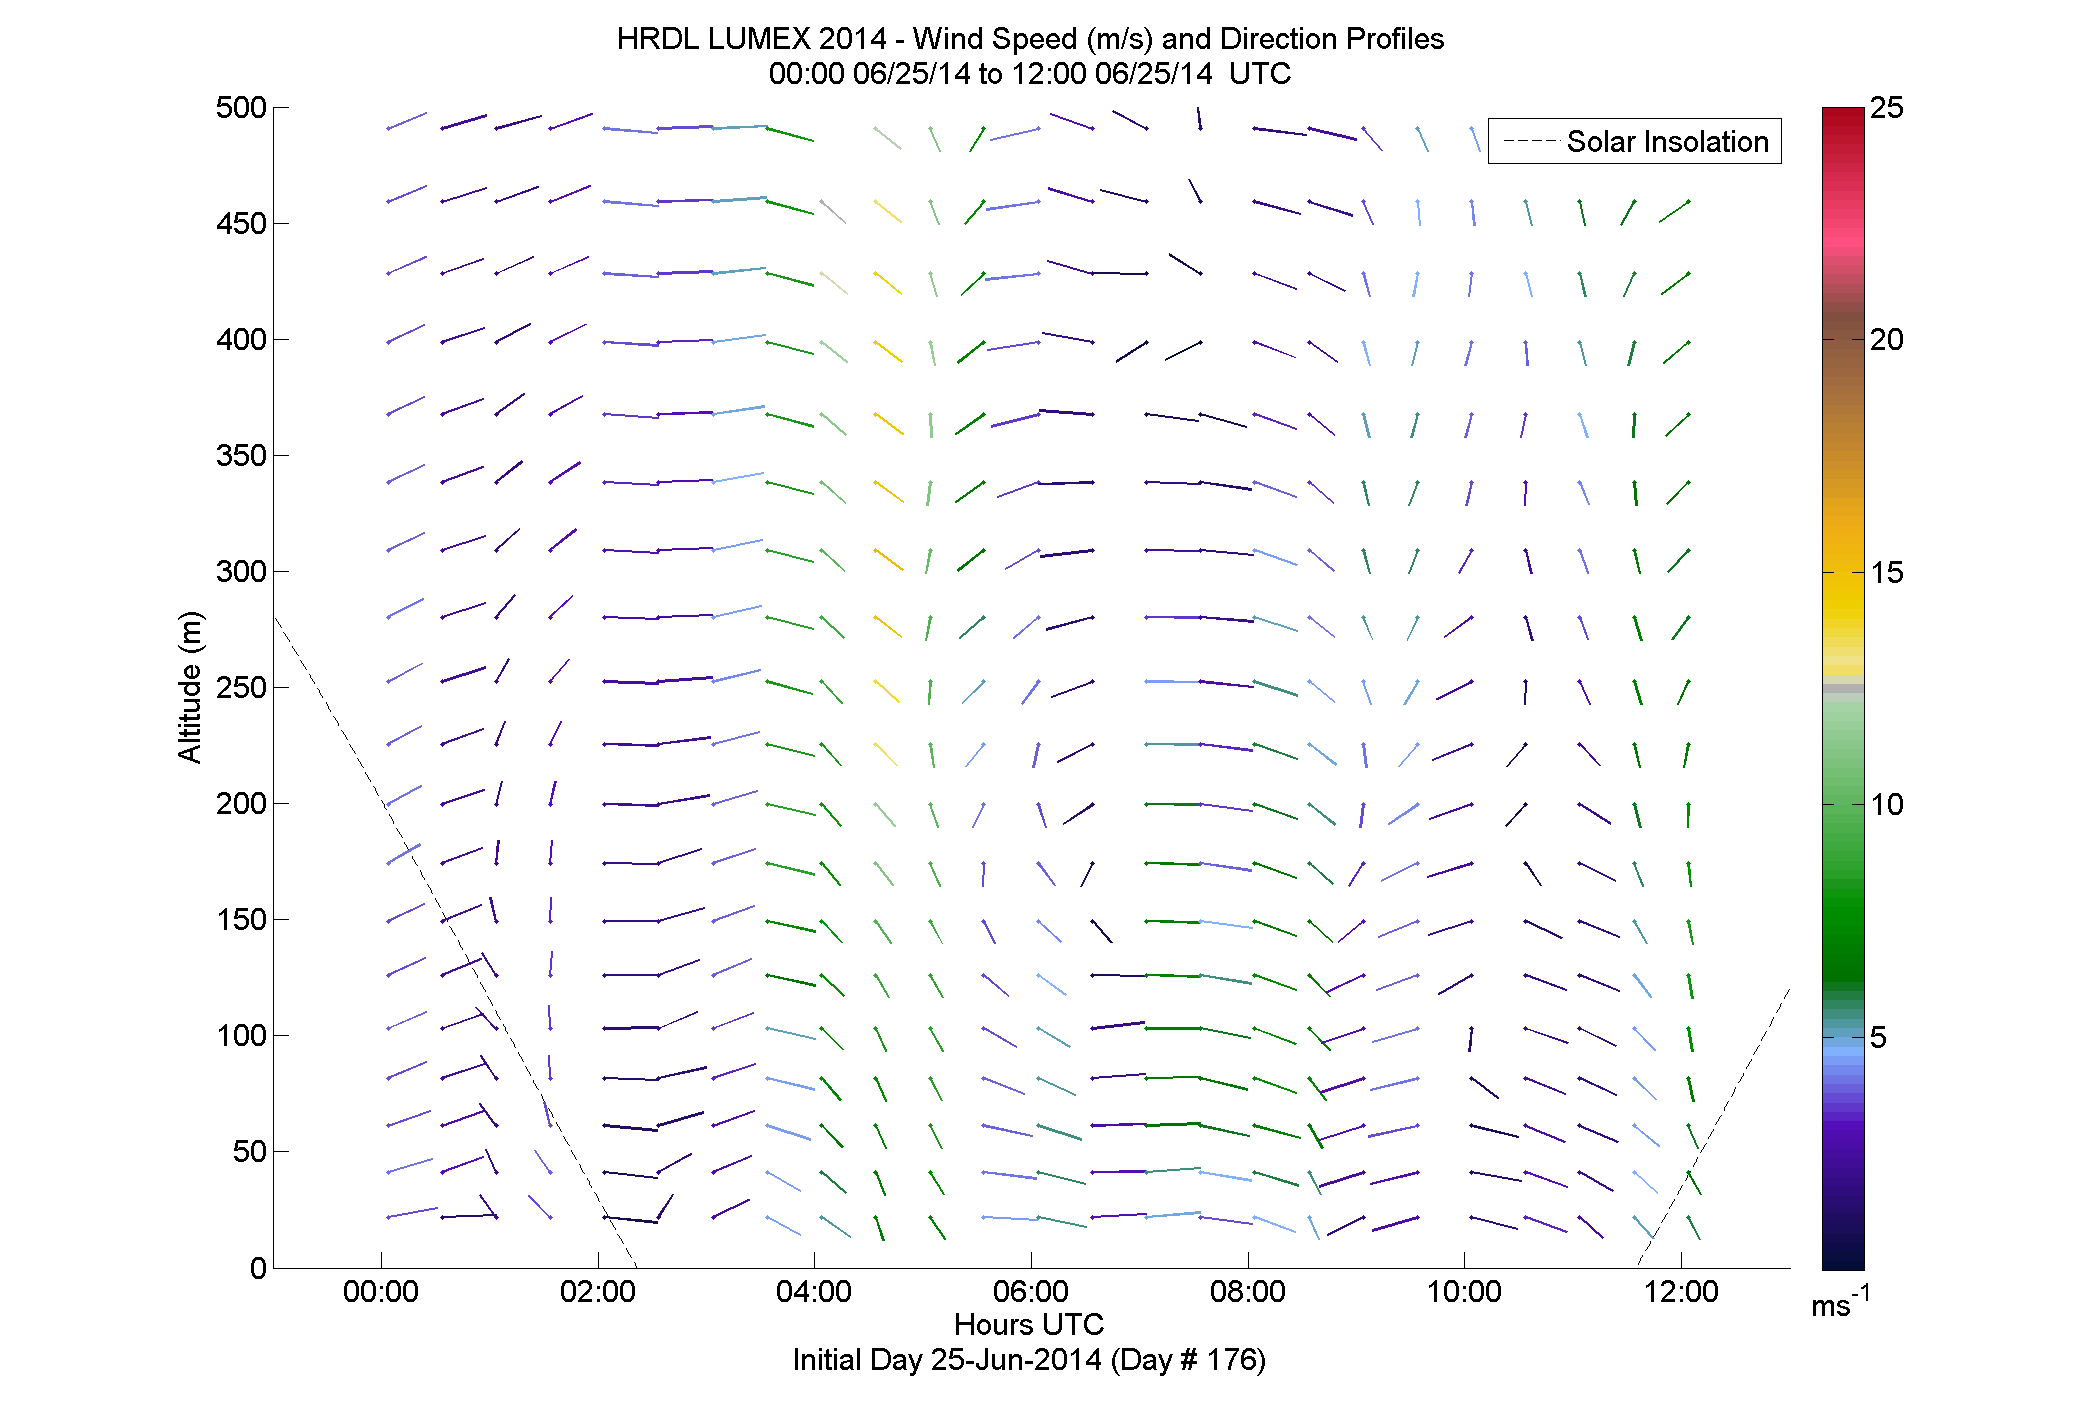 HRDL speed and direction profile - June 25 am